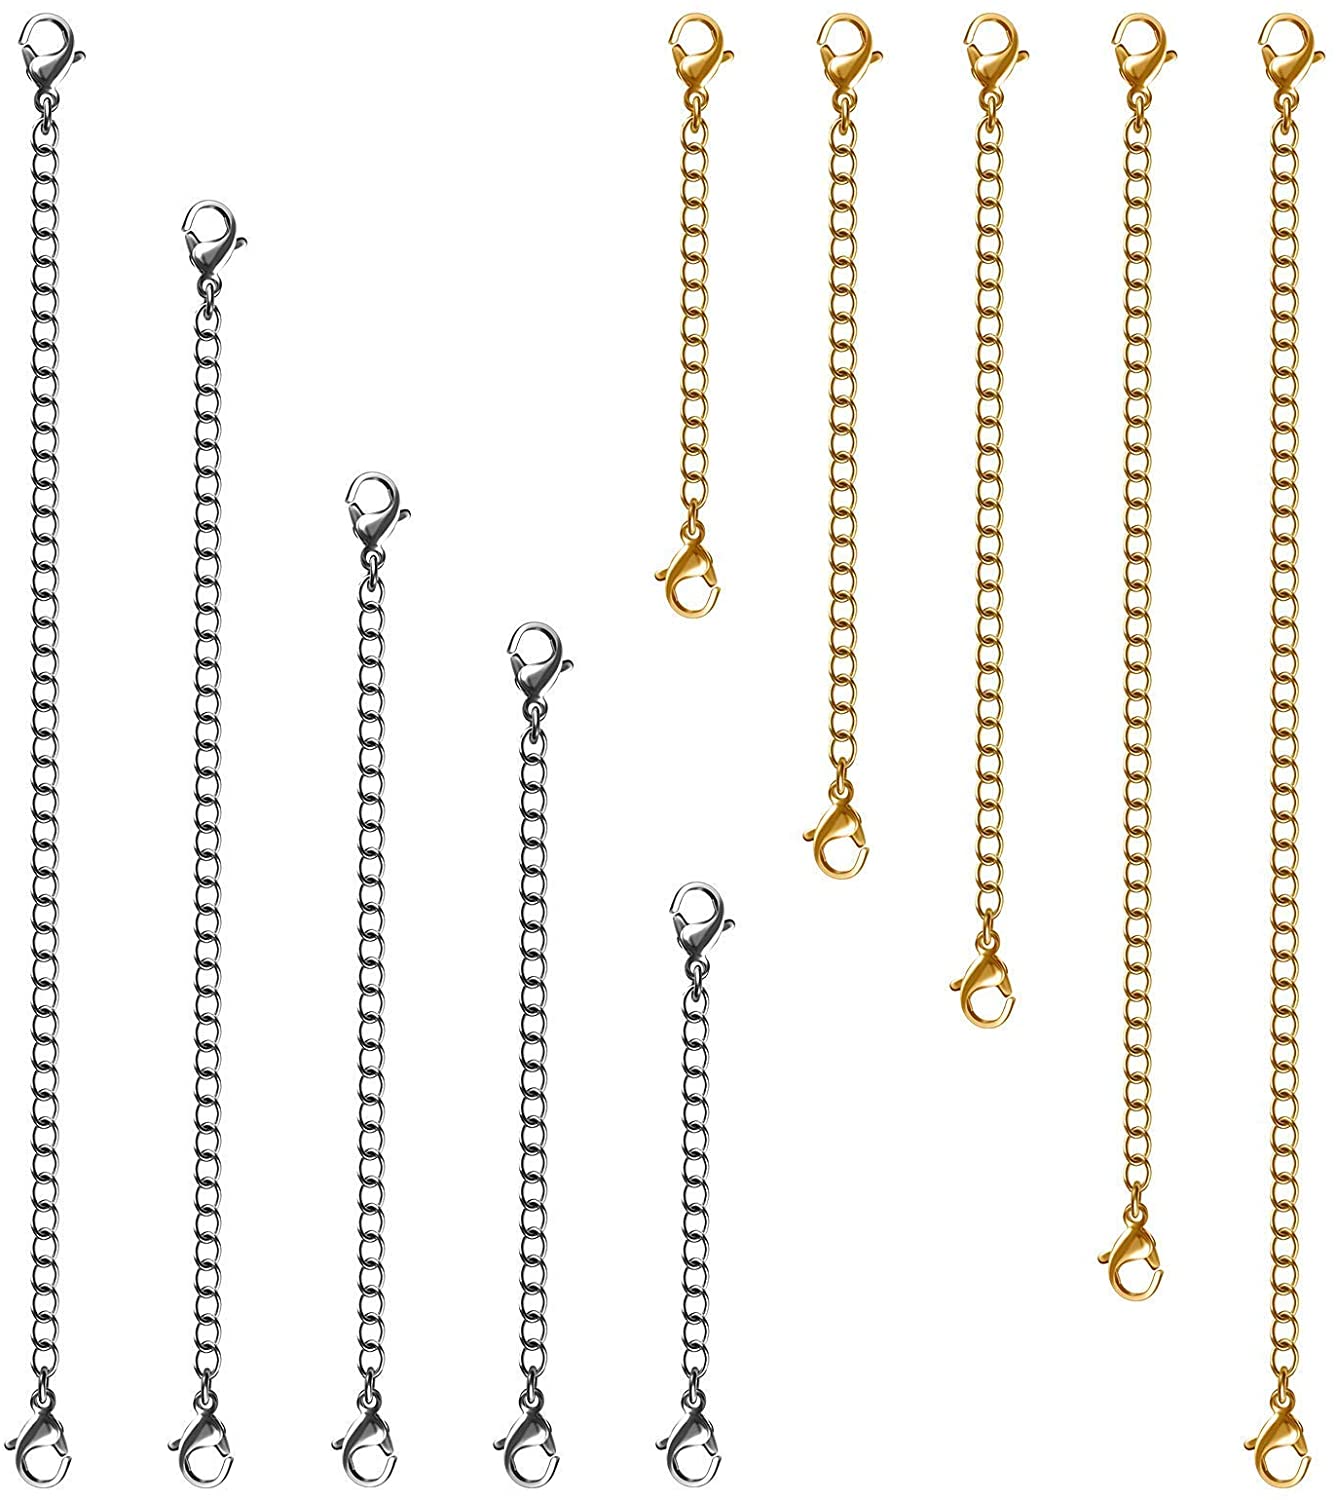 Necklace Extenders, 15 Pcs Stainless Steel Gold Silver Necklace Bracelet Anklet Extension Chains with Lobster Clasps and Closures for Jewelry Making